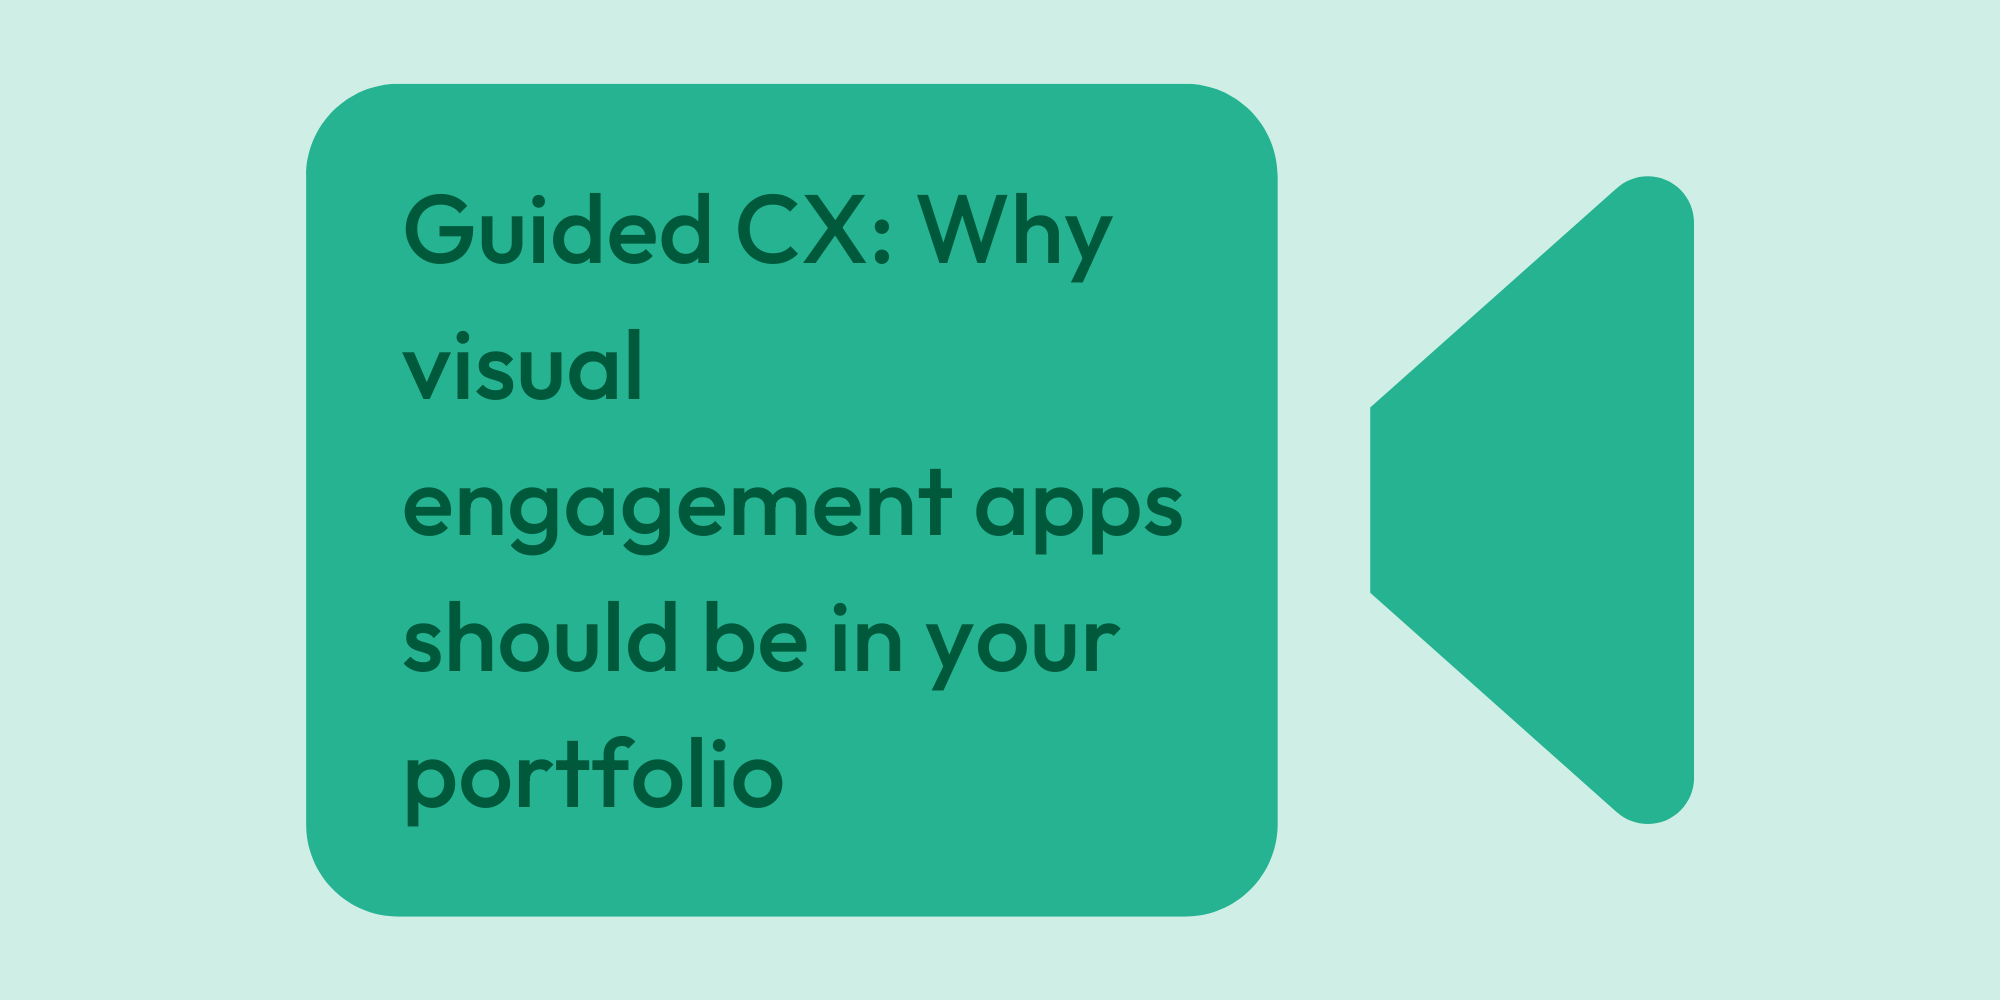 Guided CX Why visual engagement apps should be in your portfolio